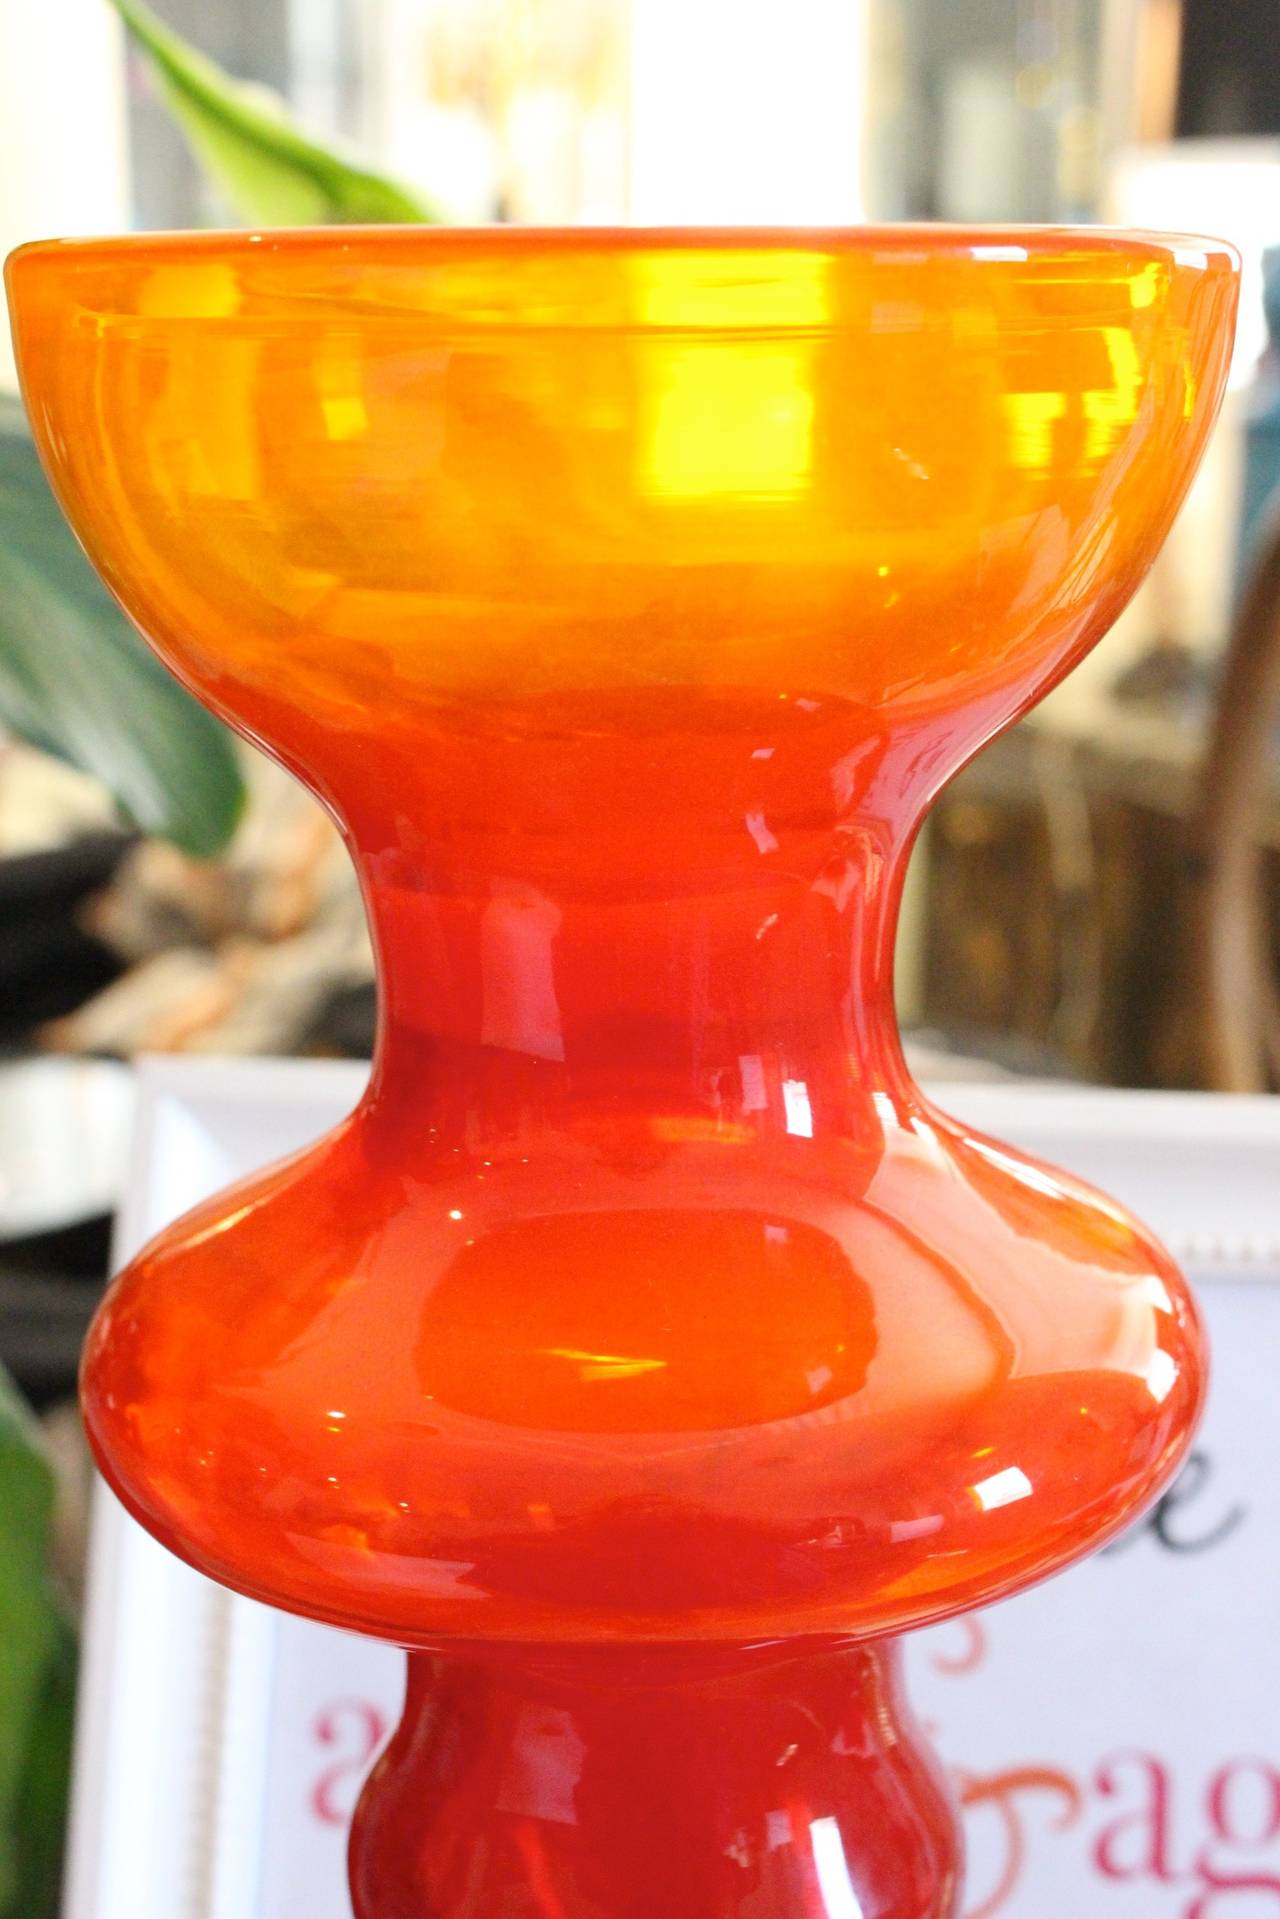 Blown Glass 1960s Red-Orange Glass Decanter by Wayne Husted for Blenko